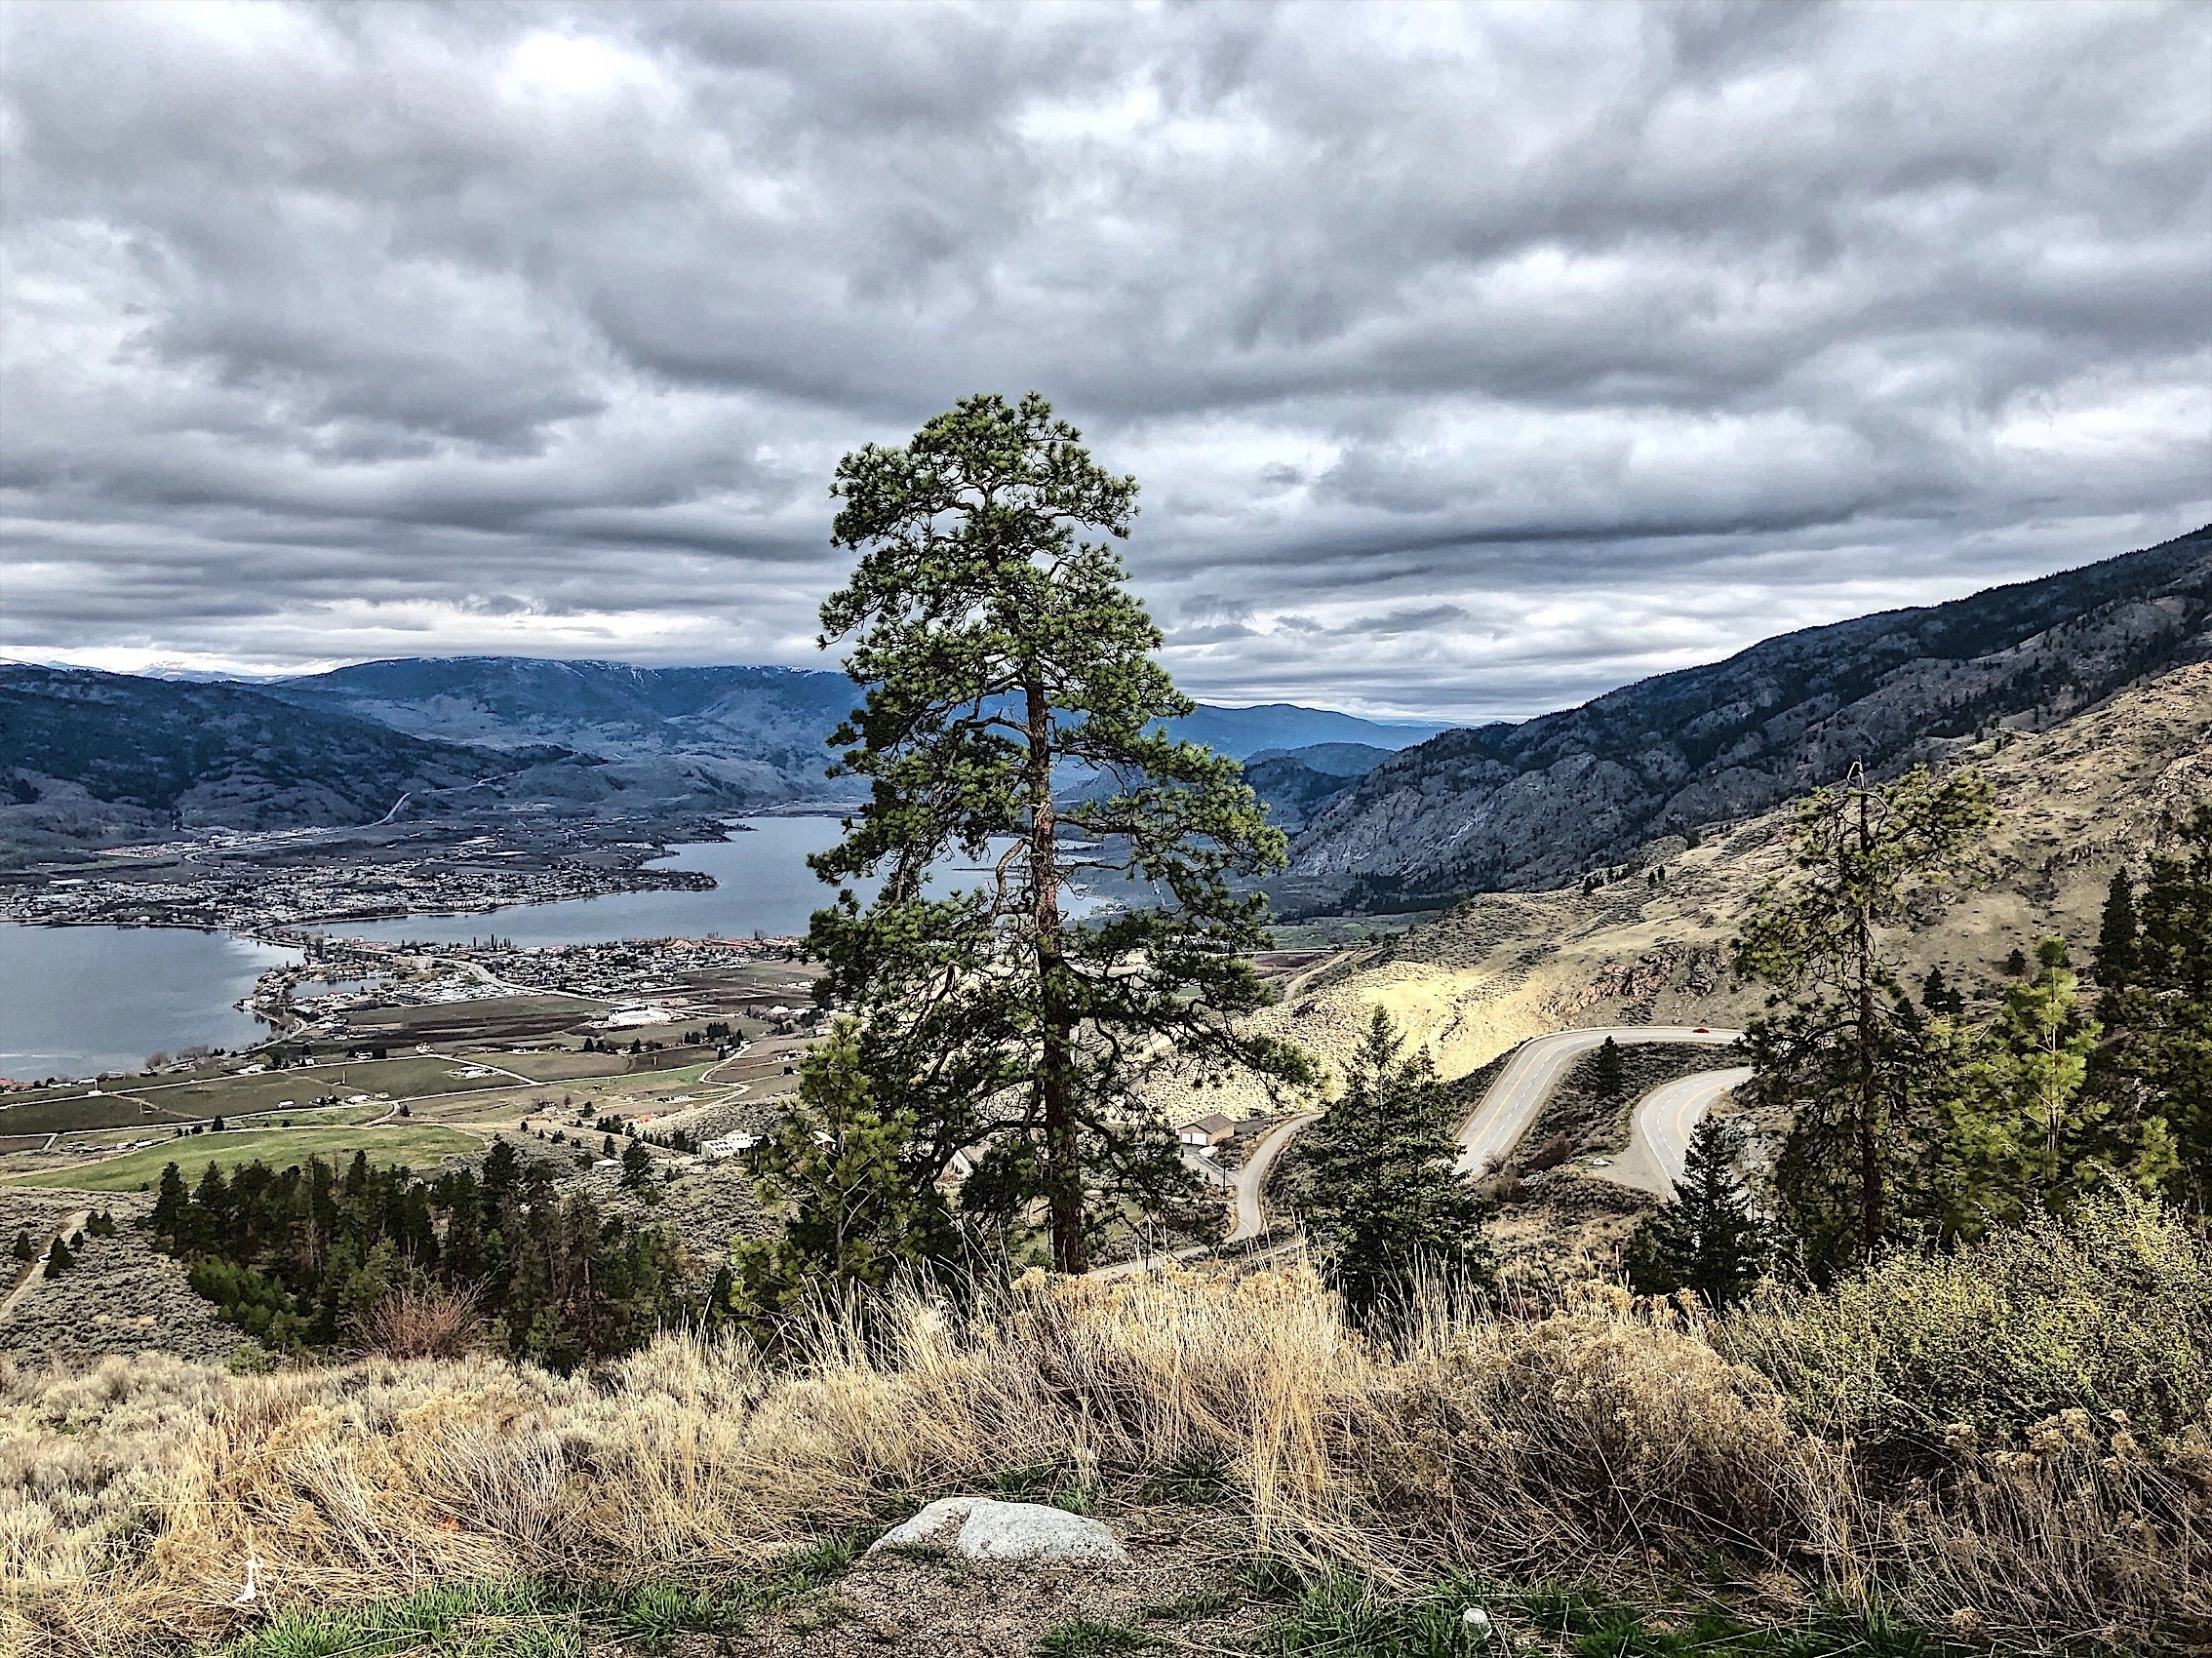 A dramatic view from the Anarchist Mountain Lookout with the city of Osoyoos below!